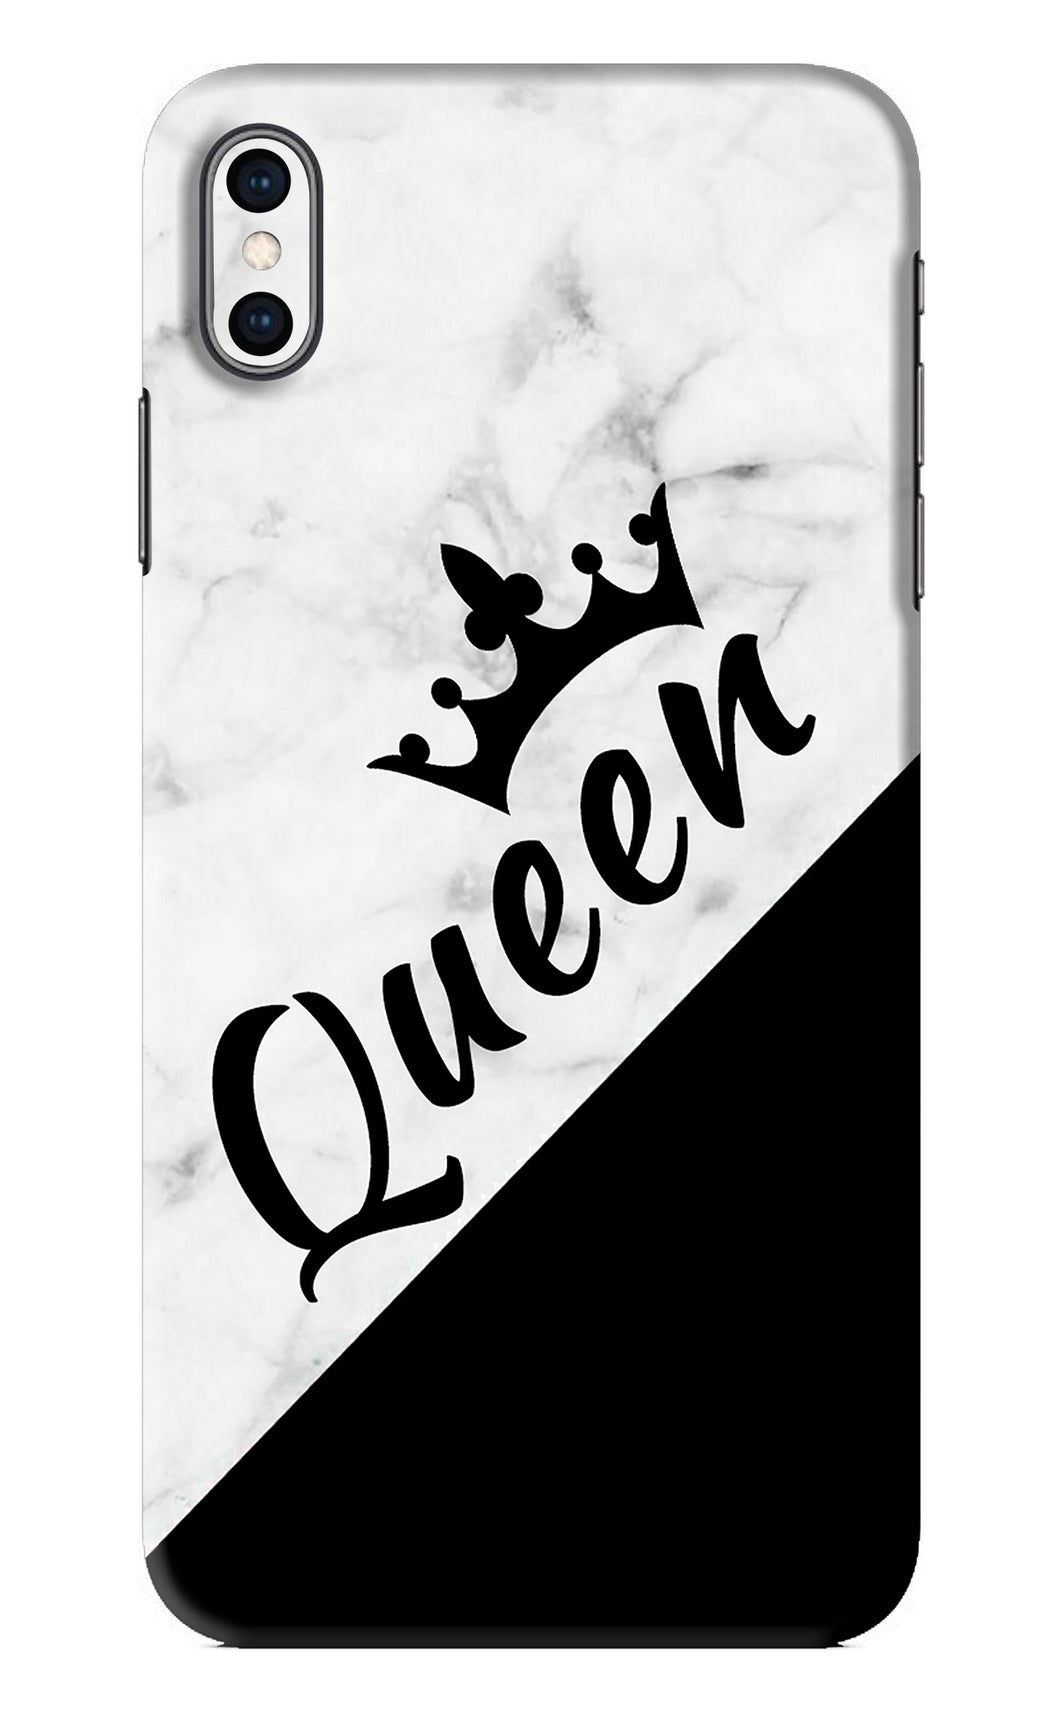 Queen iPhone XS Max Back Skin Wrap